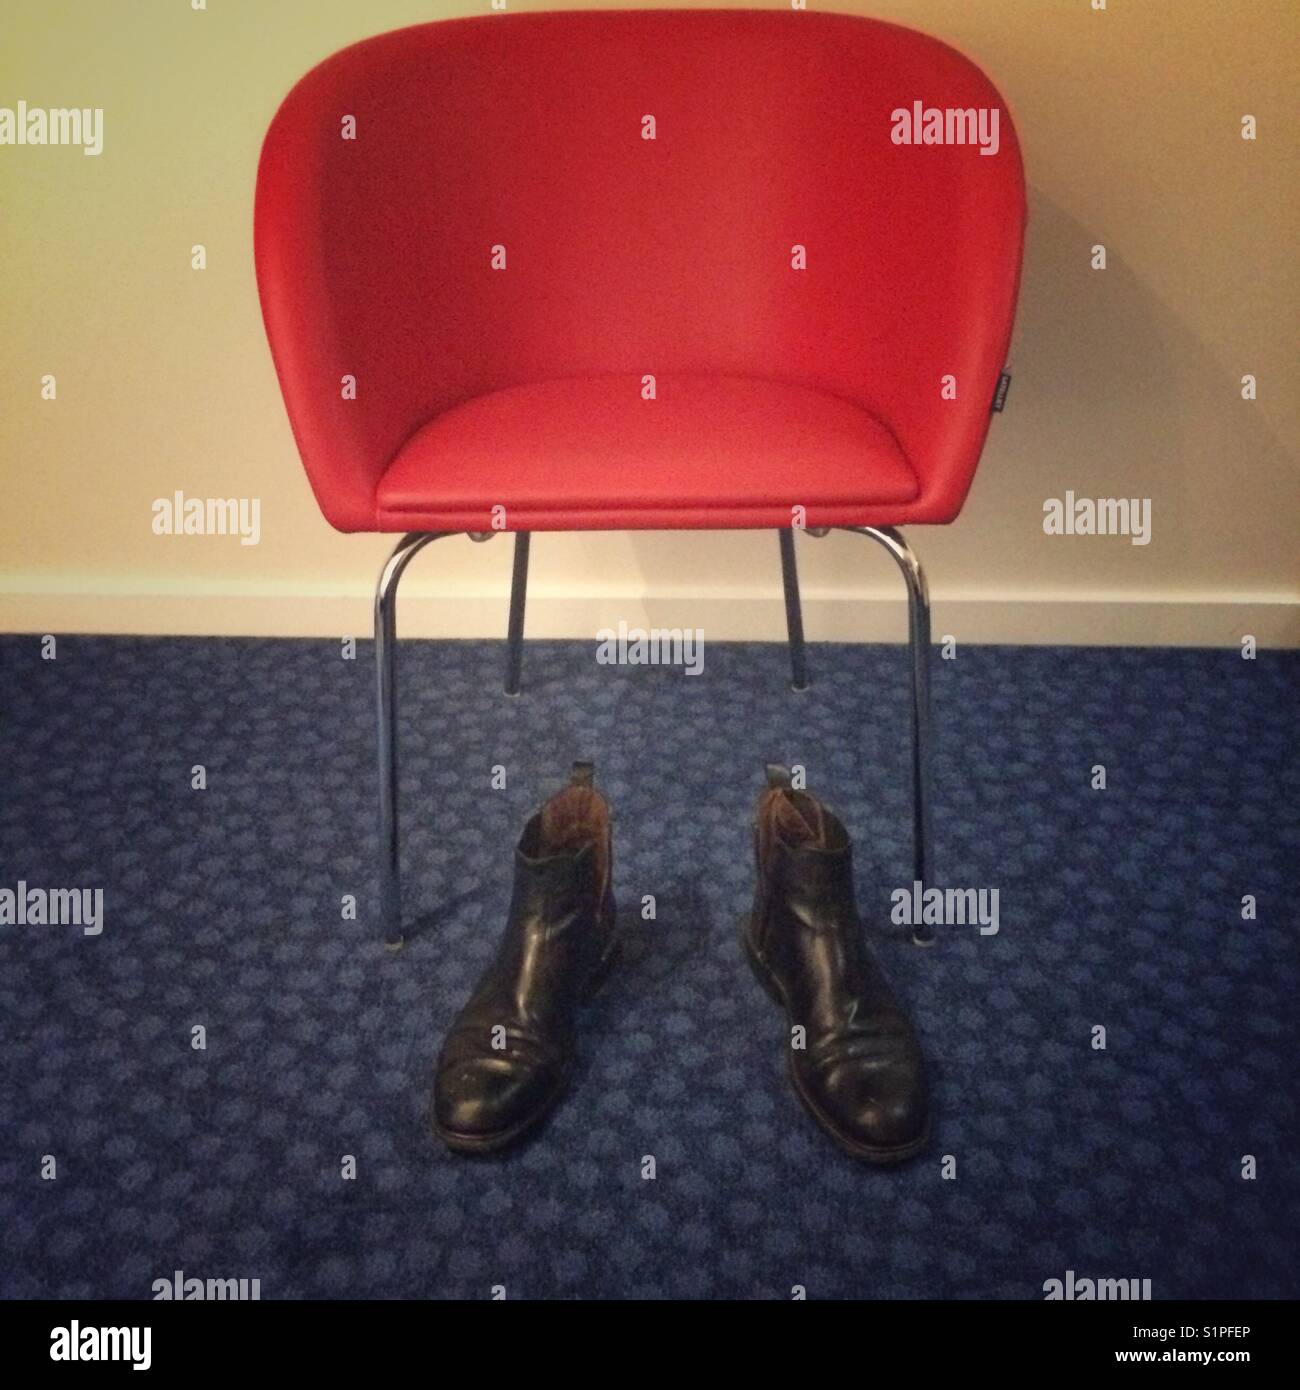 Pair of worn black Chelsea type men’s fashion boots in front of a red vinyl covered chair. Stock Photo